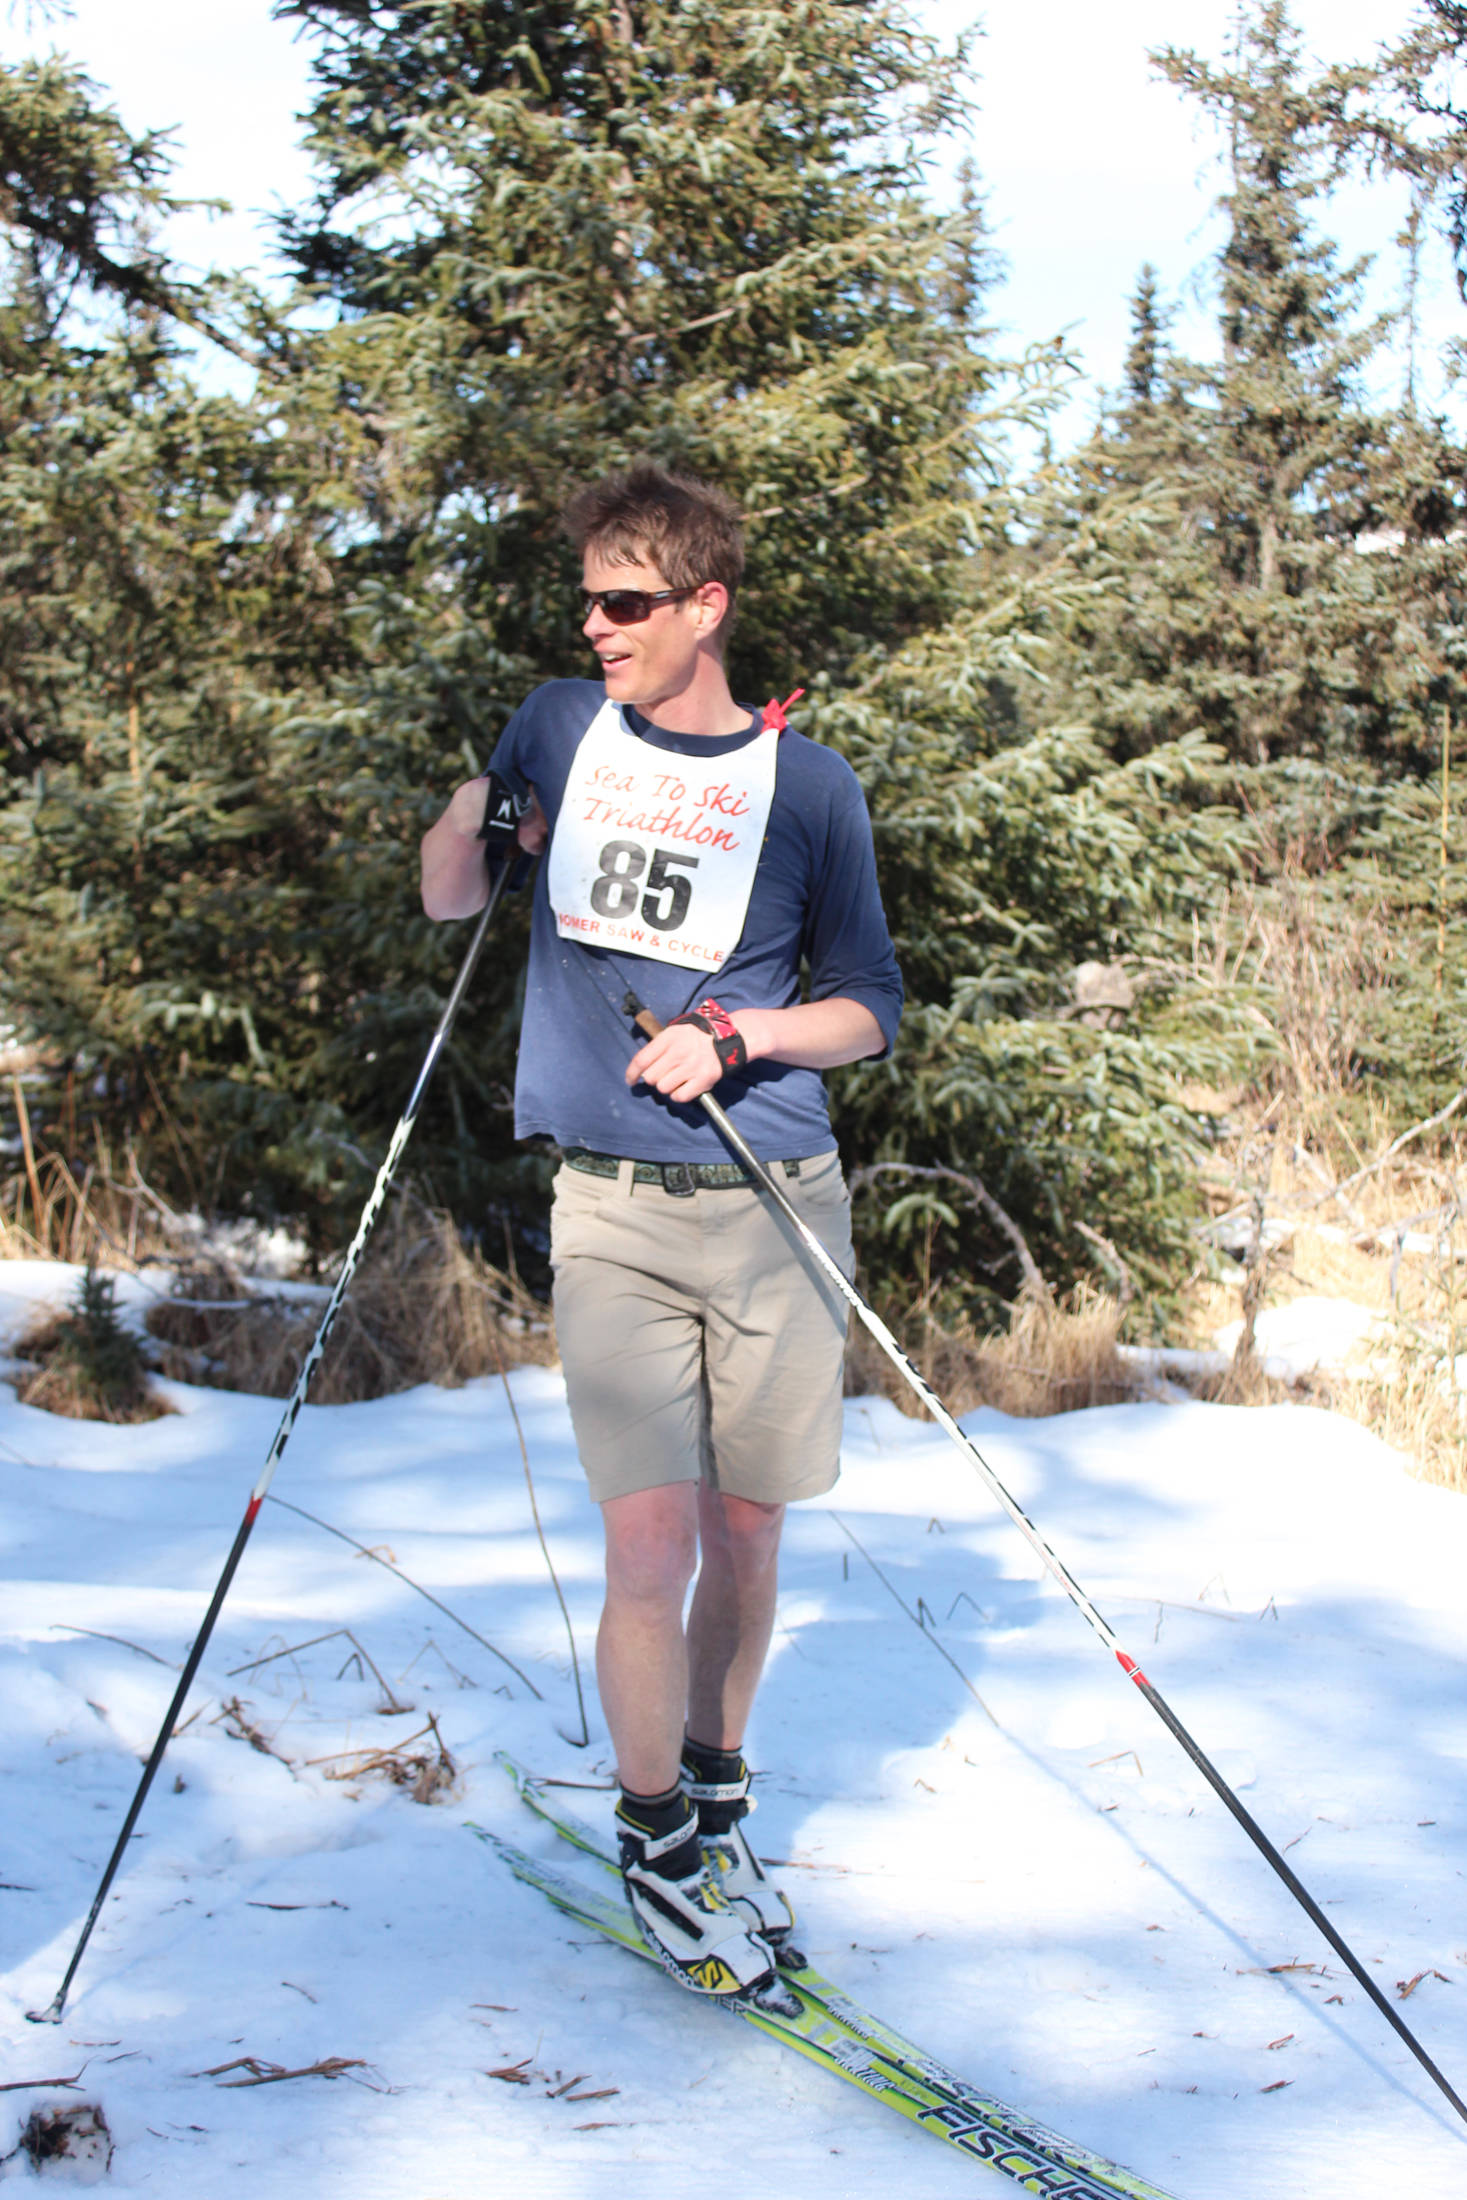 Josh Mumm relaxes after finishing the Sea to Ski Triathlon in second place as an individual racer with a time of 1 hour, 5 minutes, 59 seconds, a mere four seconds behind winner Denver Waclawski. Participants finished the race at the Roger’s Loop Trailhead off Highland Drive on Sunday, March 25, 2018 in Homer, Alaska. (Photo by Megan Pacer/Homer News)